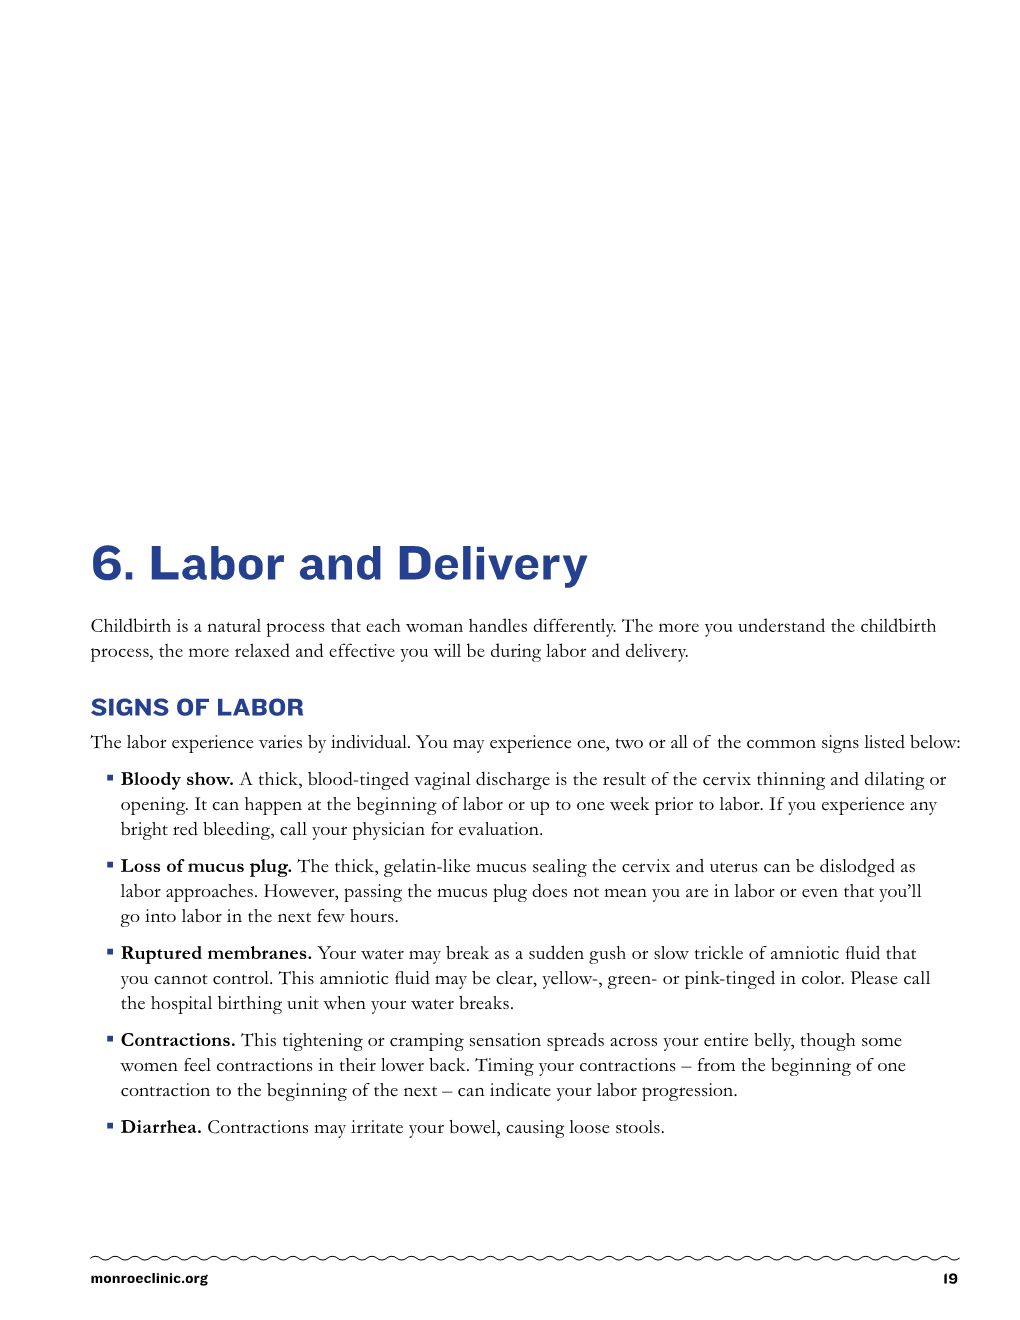 6. Labor and Delivery